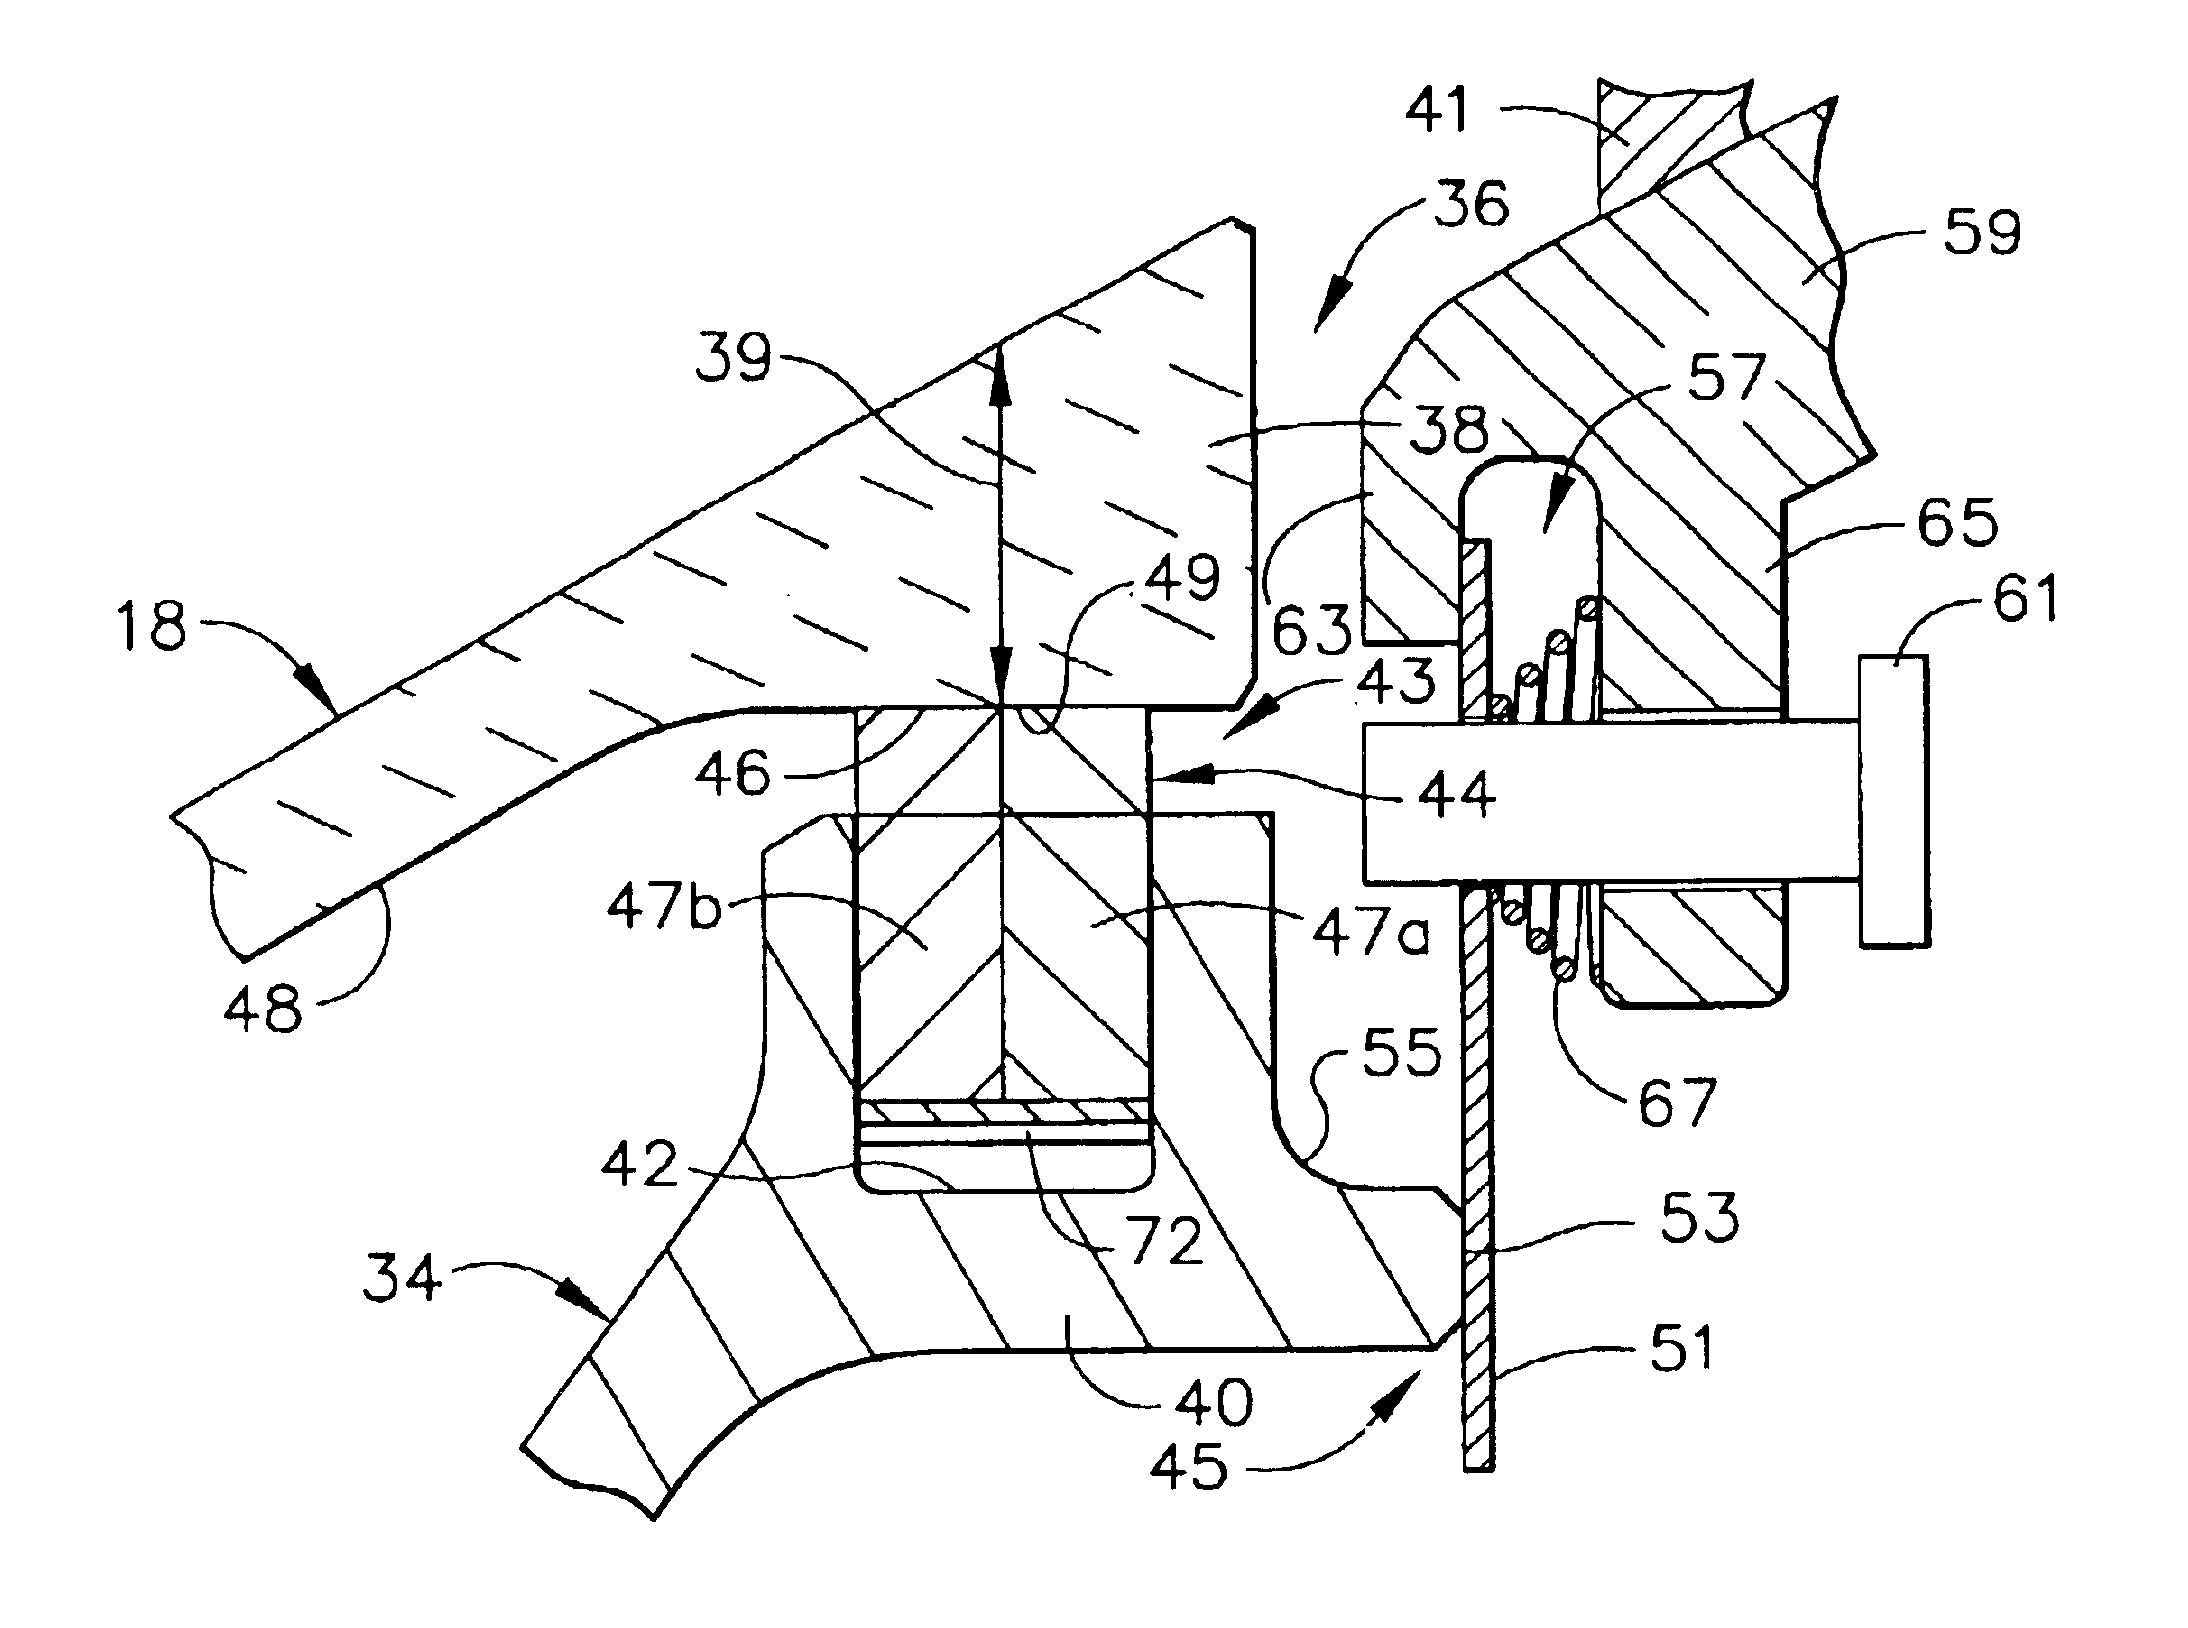 Sealing assembly for the aft end of a ceramic matrix composite liner in a gas turbine engine combustor